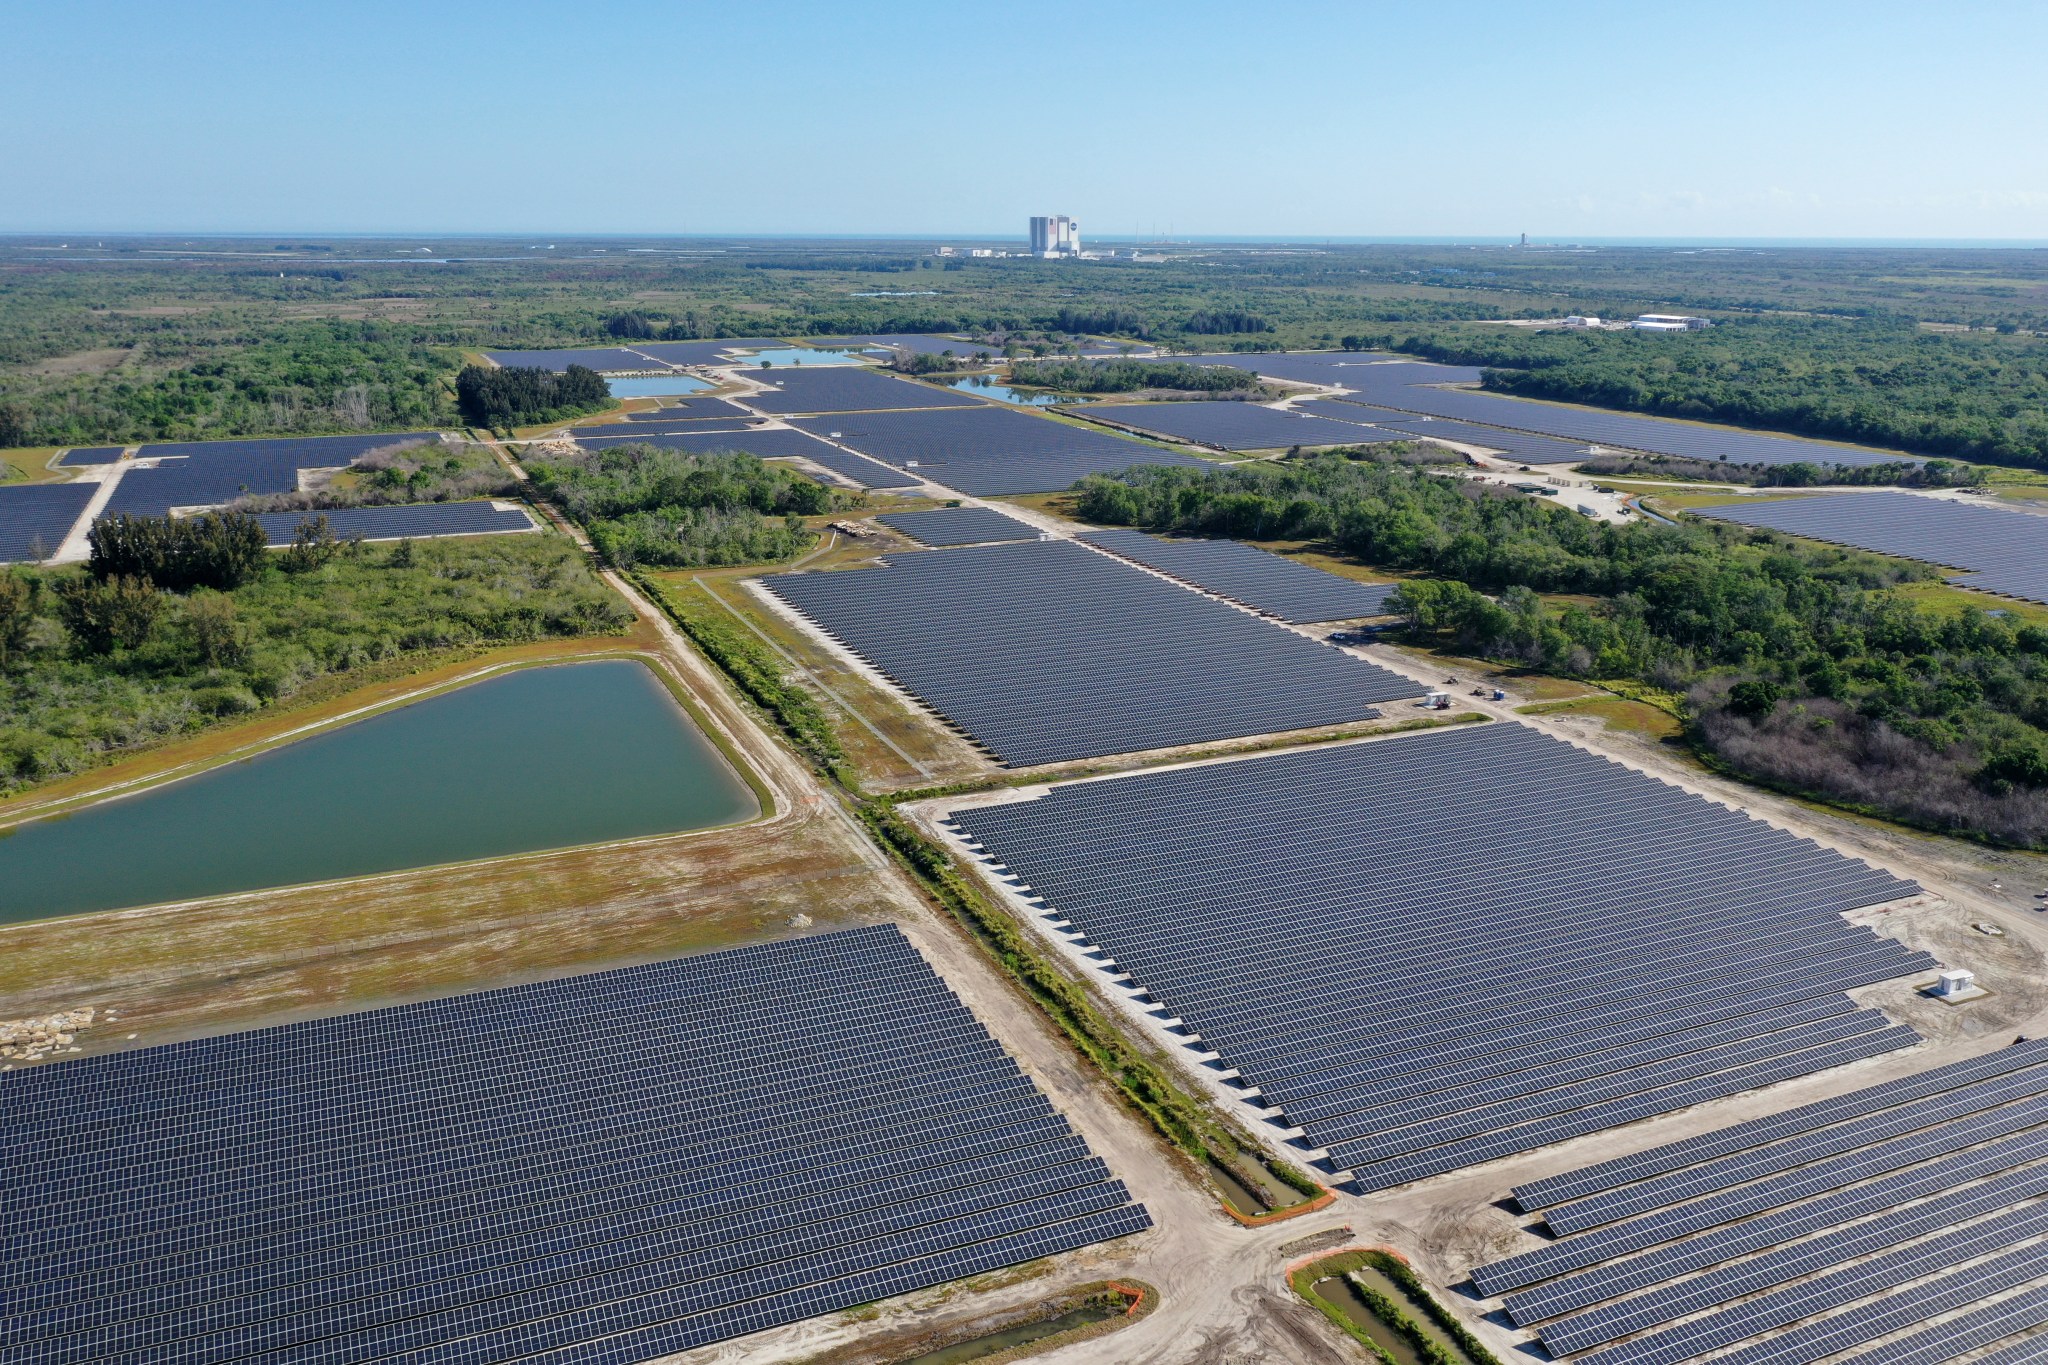 Florida Power and Light's (FPL) new Discovery Solar Energy Center is a 74.5 megawatt solar site, spanning 491 acres at NASA's Kennedy Space Center in Florida.